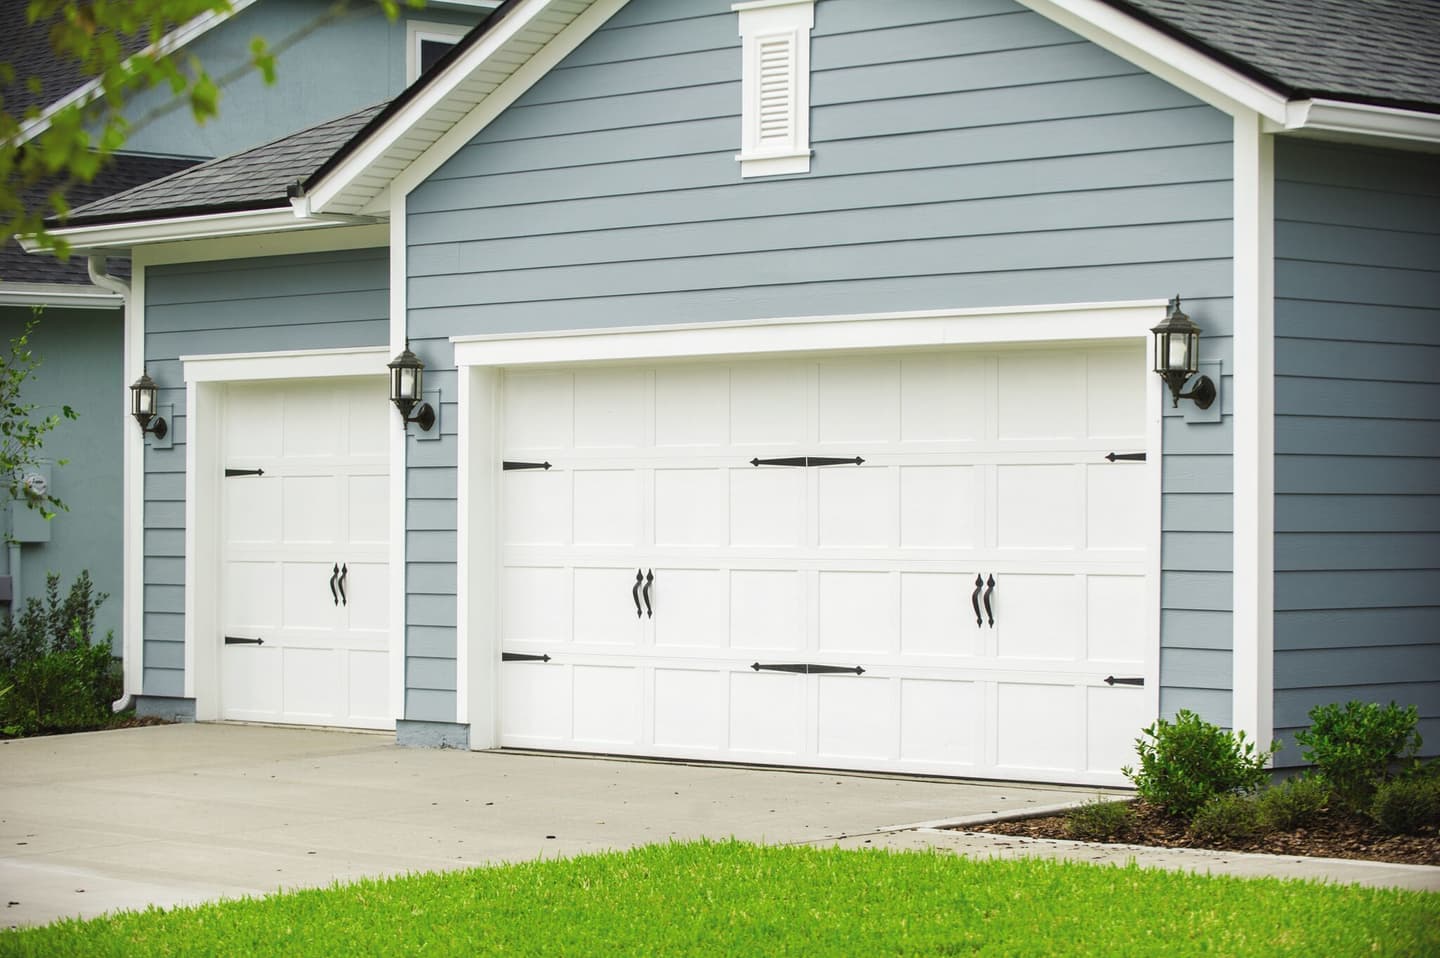 grey-house-with-front-drive-and-white-garage-doors-with-black-hardware.jpg?mtime=20181123164206#asset:10858:c1440xauto